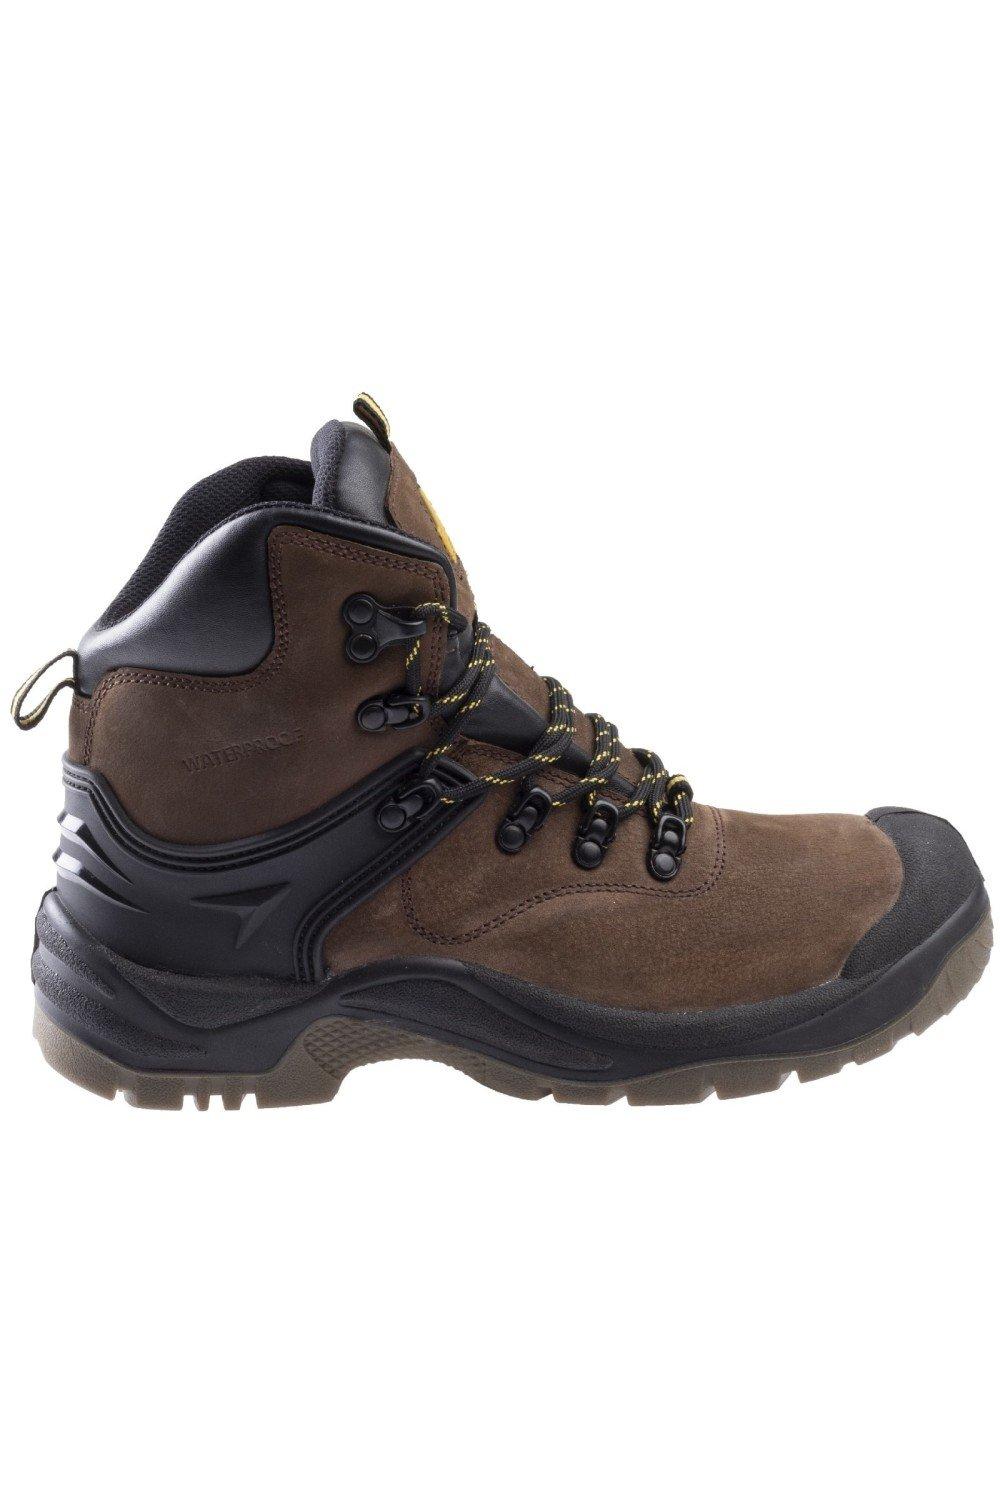 FS197 Waterproof Safety Boots